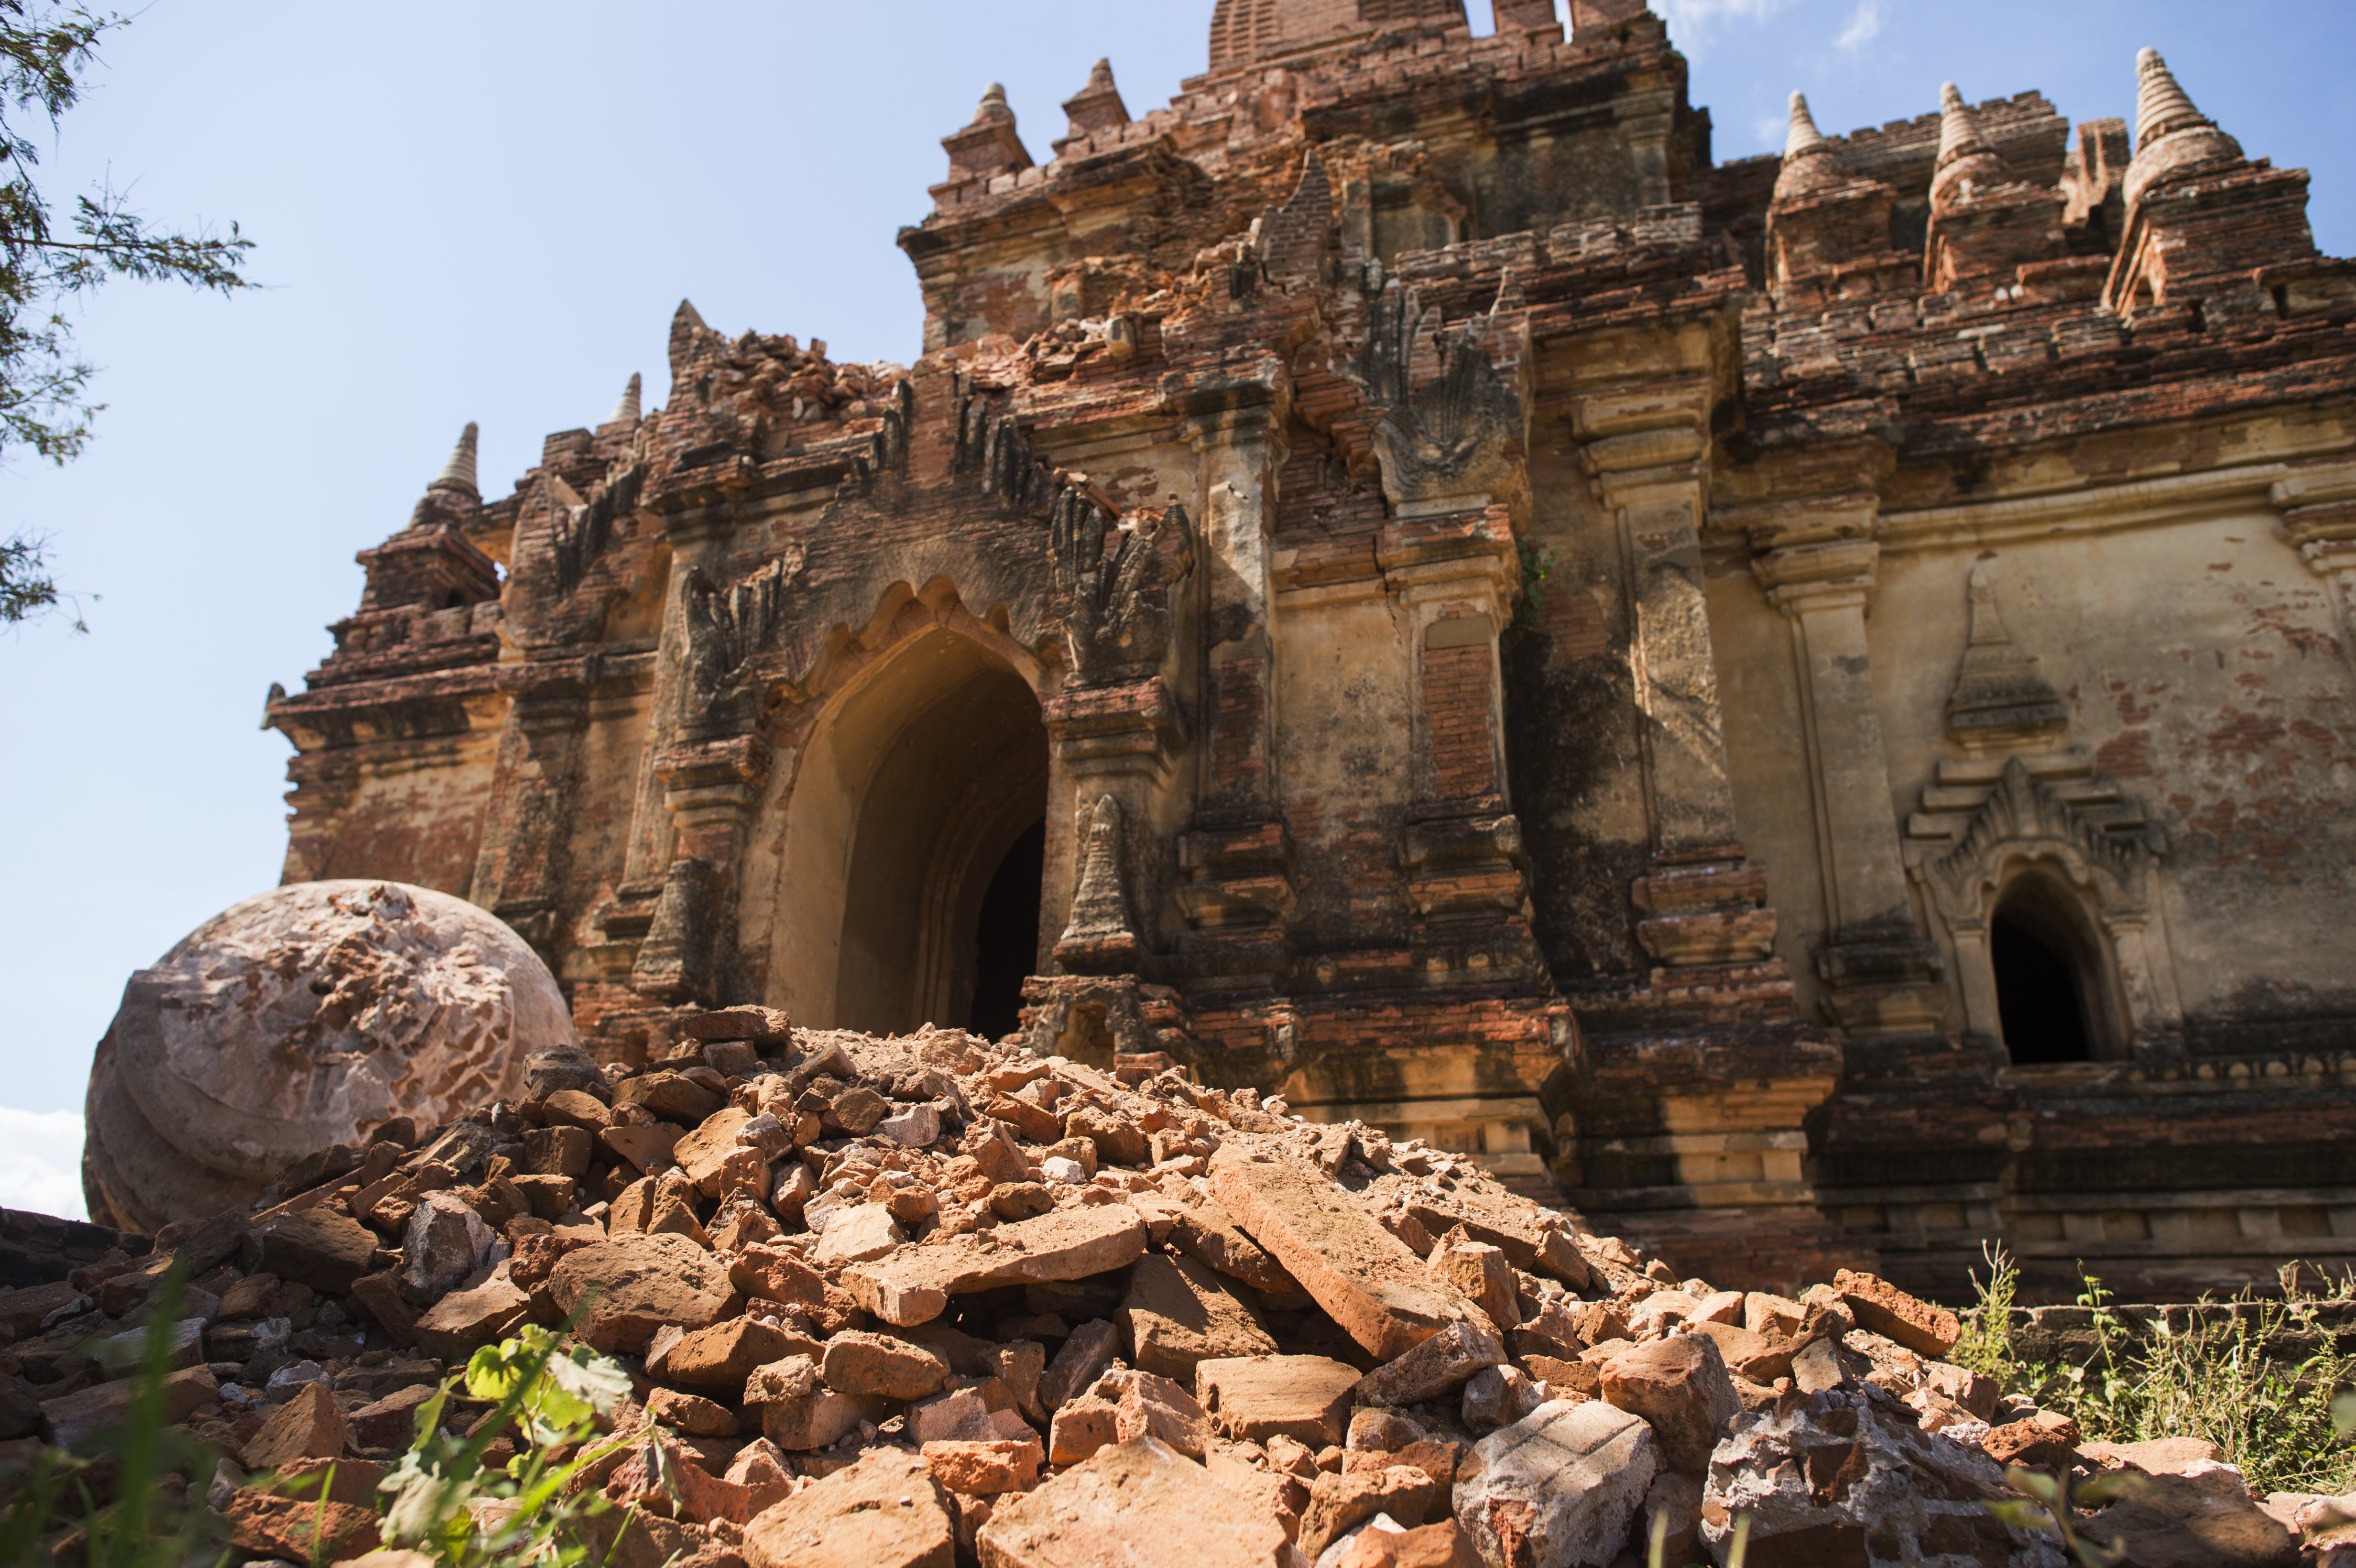 The damaged ancient Myauk Guni Temple. Photo: YE AUNG THU/AFP/Getty Images.